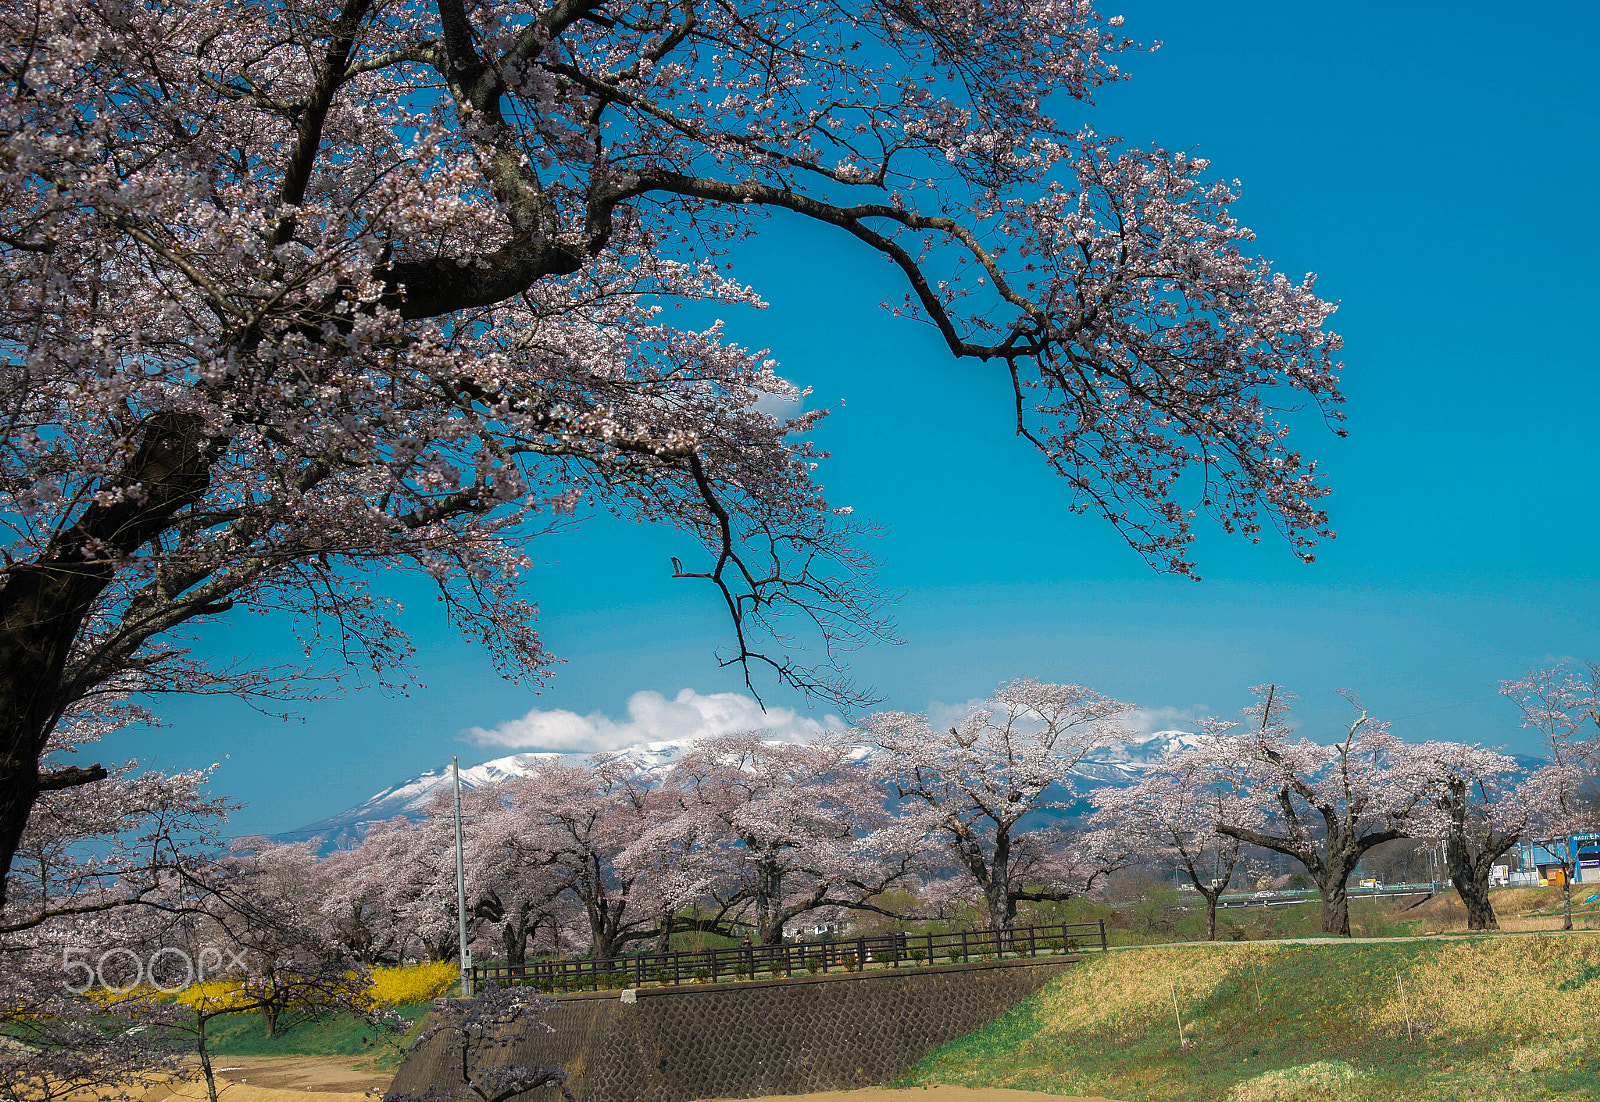 Sony a99 II sample photo. Cherry blossom or mountain? photography